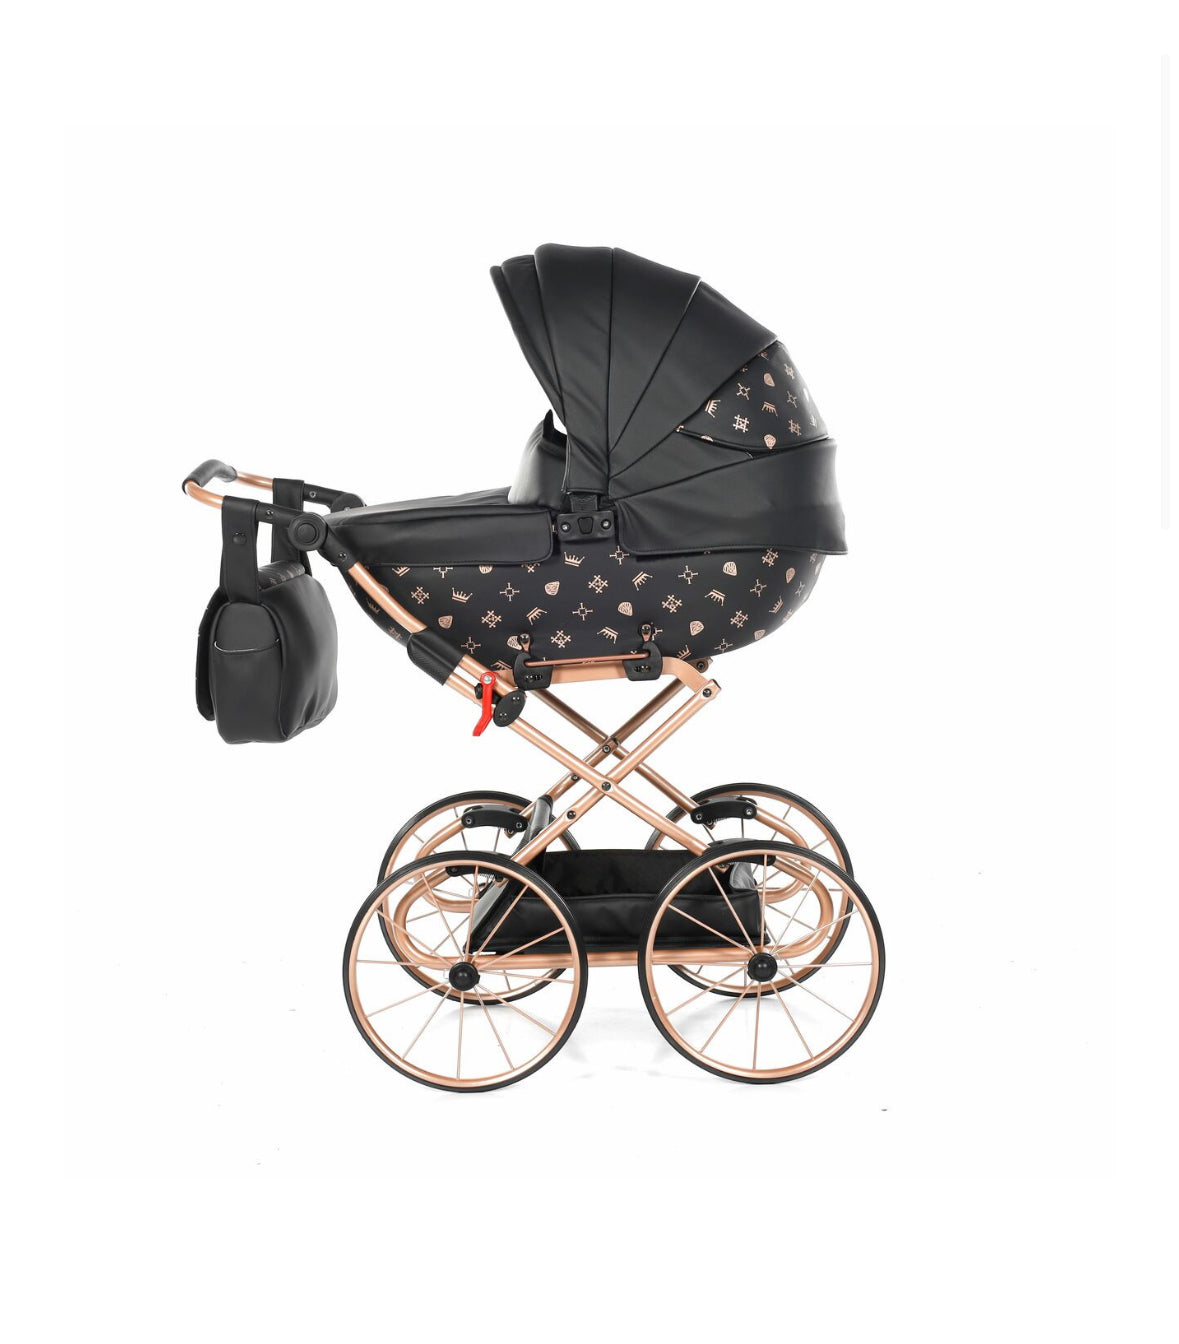 IMPERIAL CLASSIC BLACK & ROSE GOLD DOLL'S PRAM (1-2 days delivery)